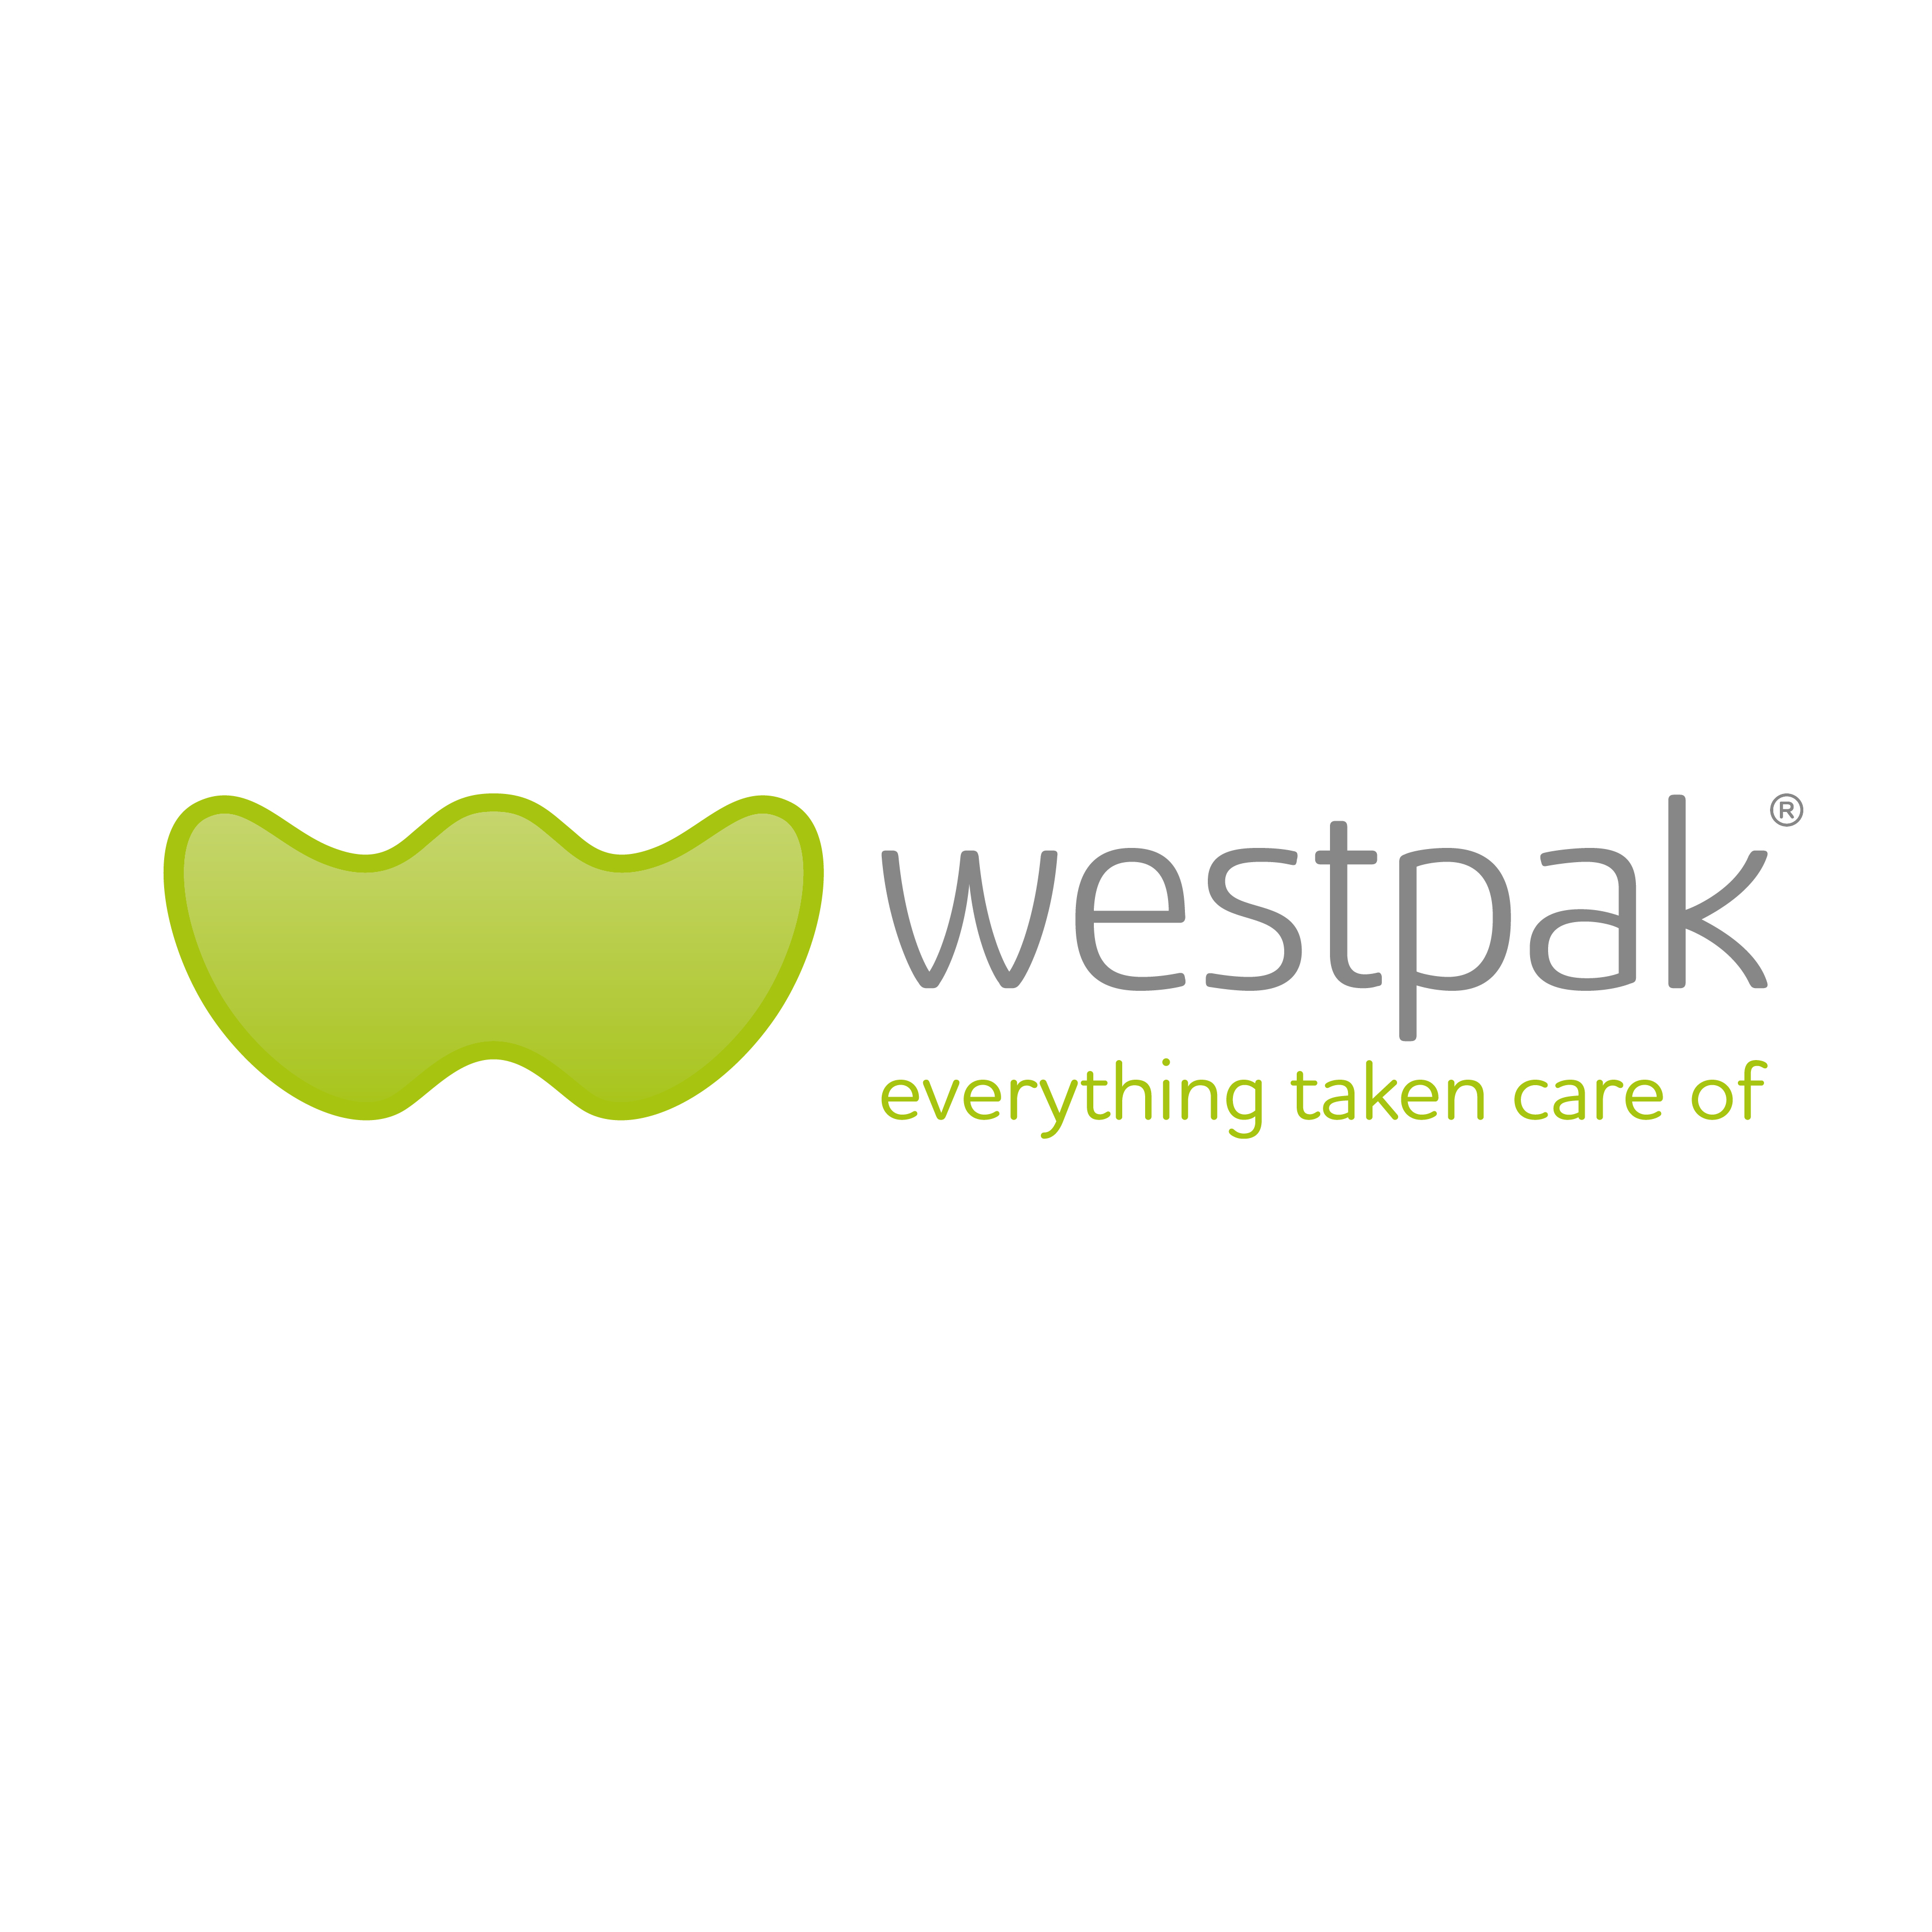 Logo of Westpak Group Ltd Packaging And Wrapping Equipment And Supplies In Keston, Kent